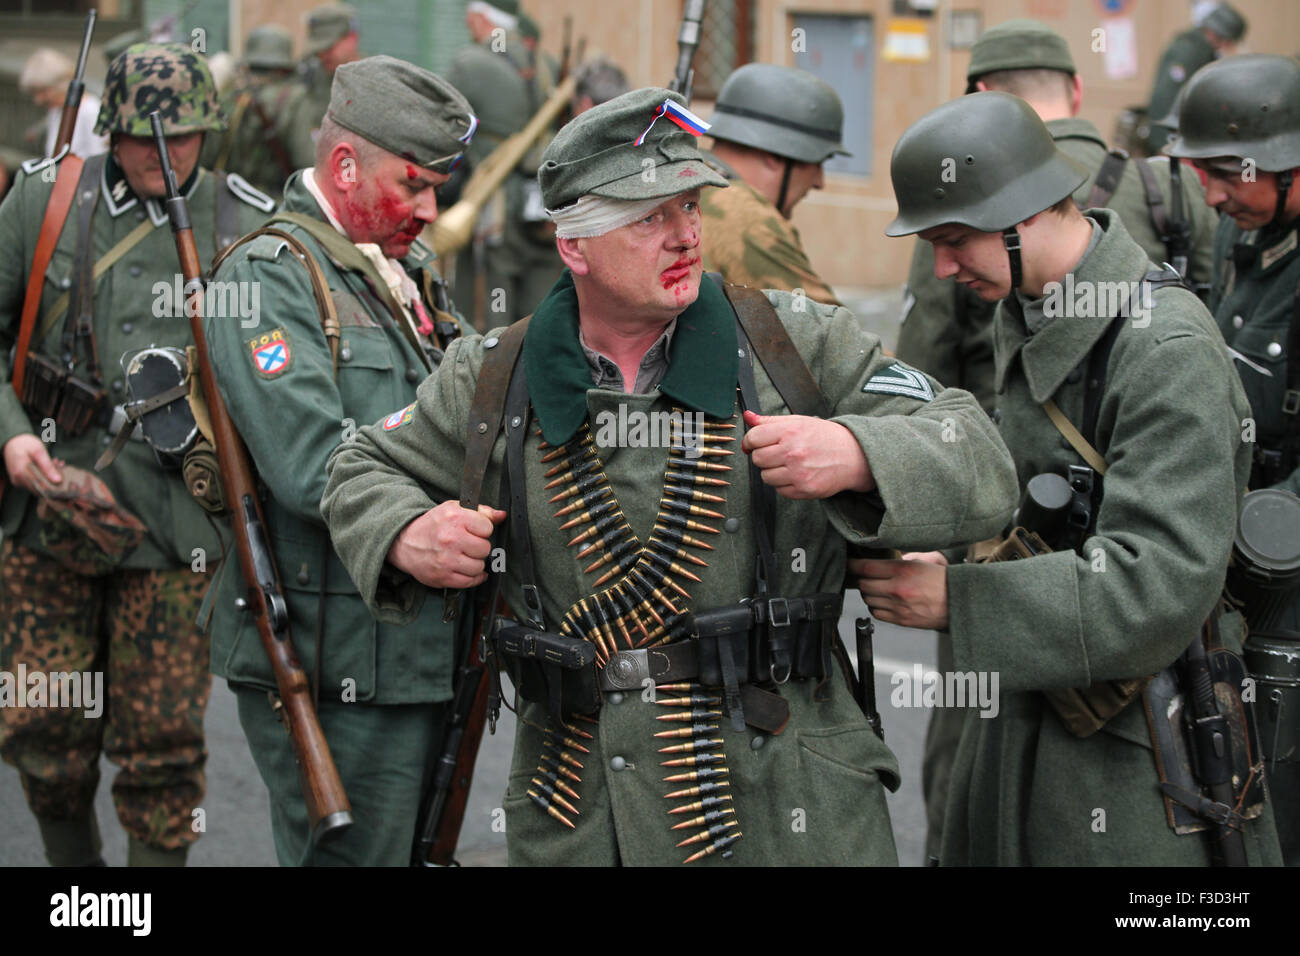 Reenactors uniformed as soldiers of the Russian Liberation Army (ROA)  attend the reenactment of the 1945 Prague uprising in Prague, Czech  Republic, on May 9, 2015. The Russian Liberation Army also known